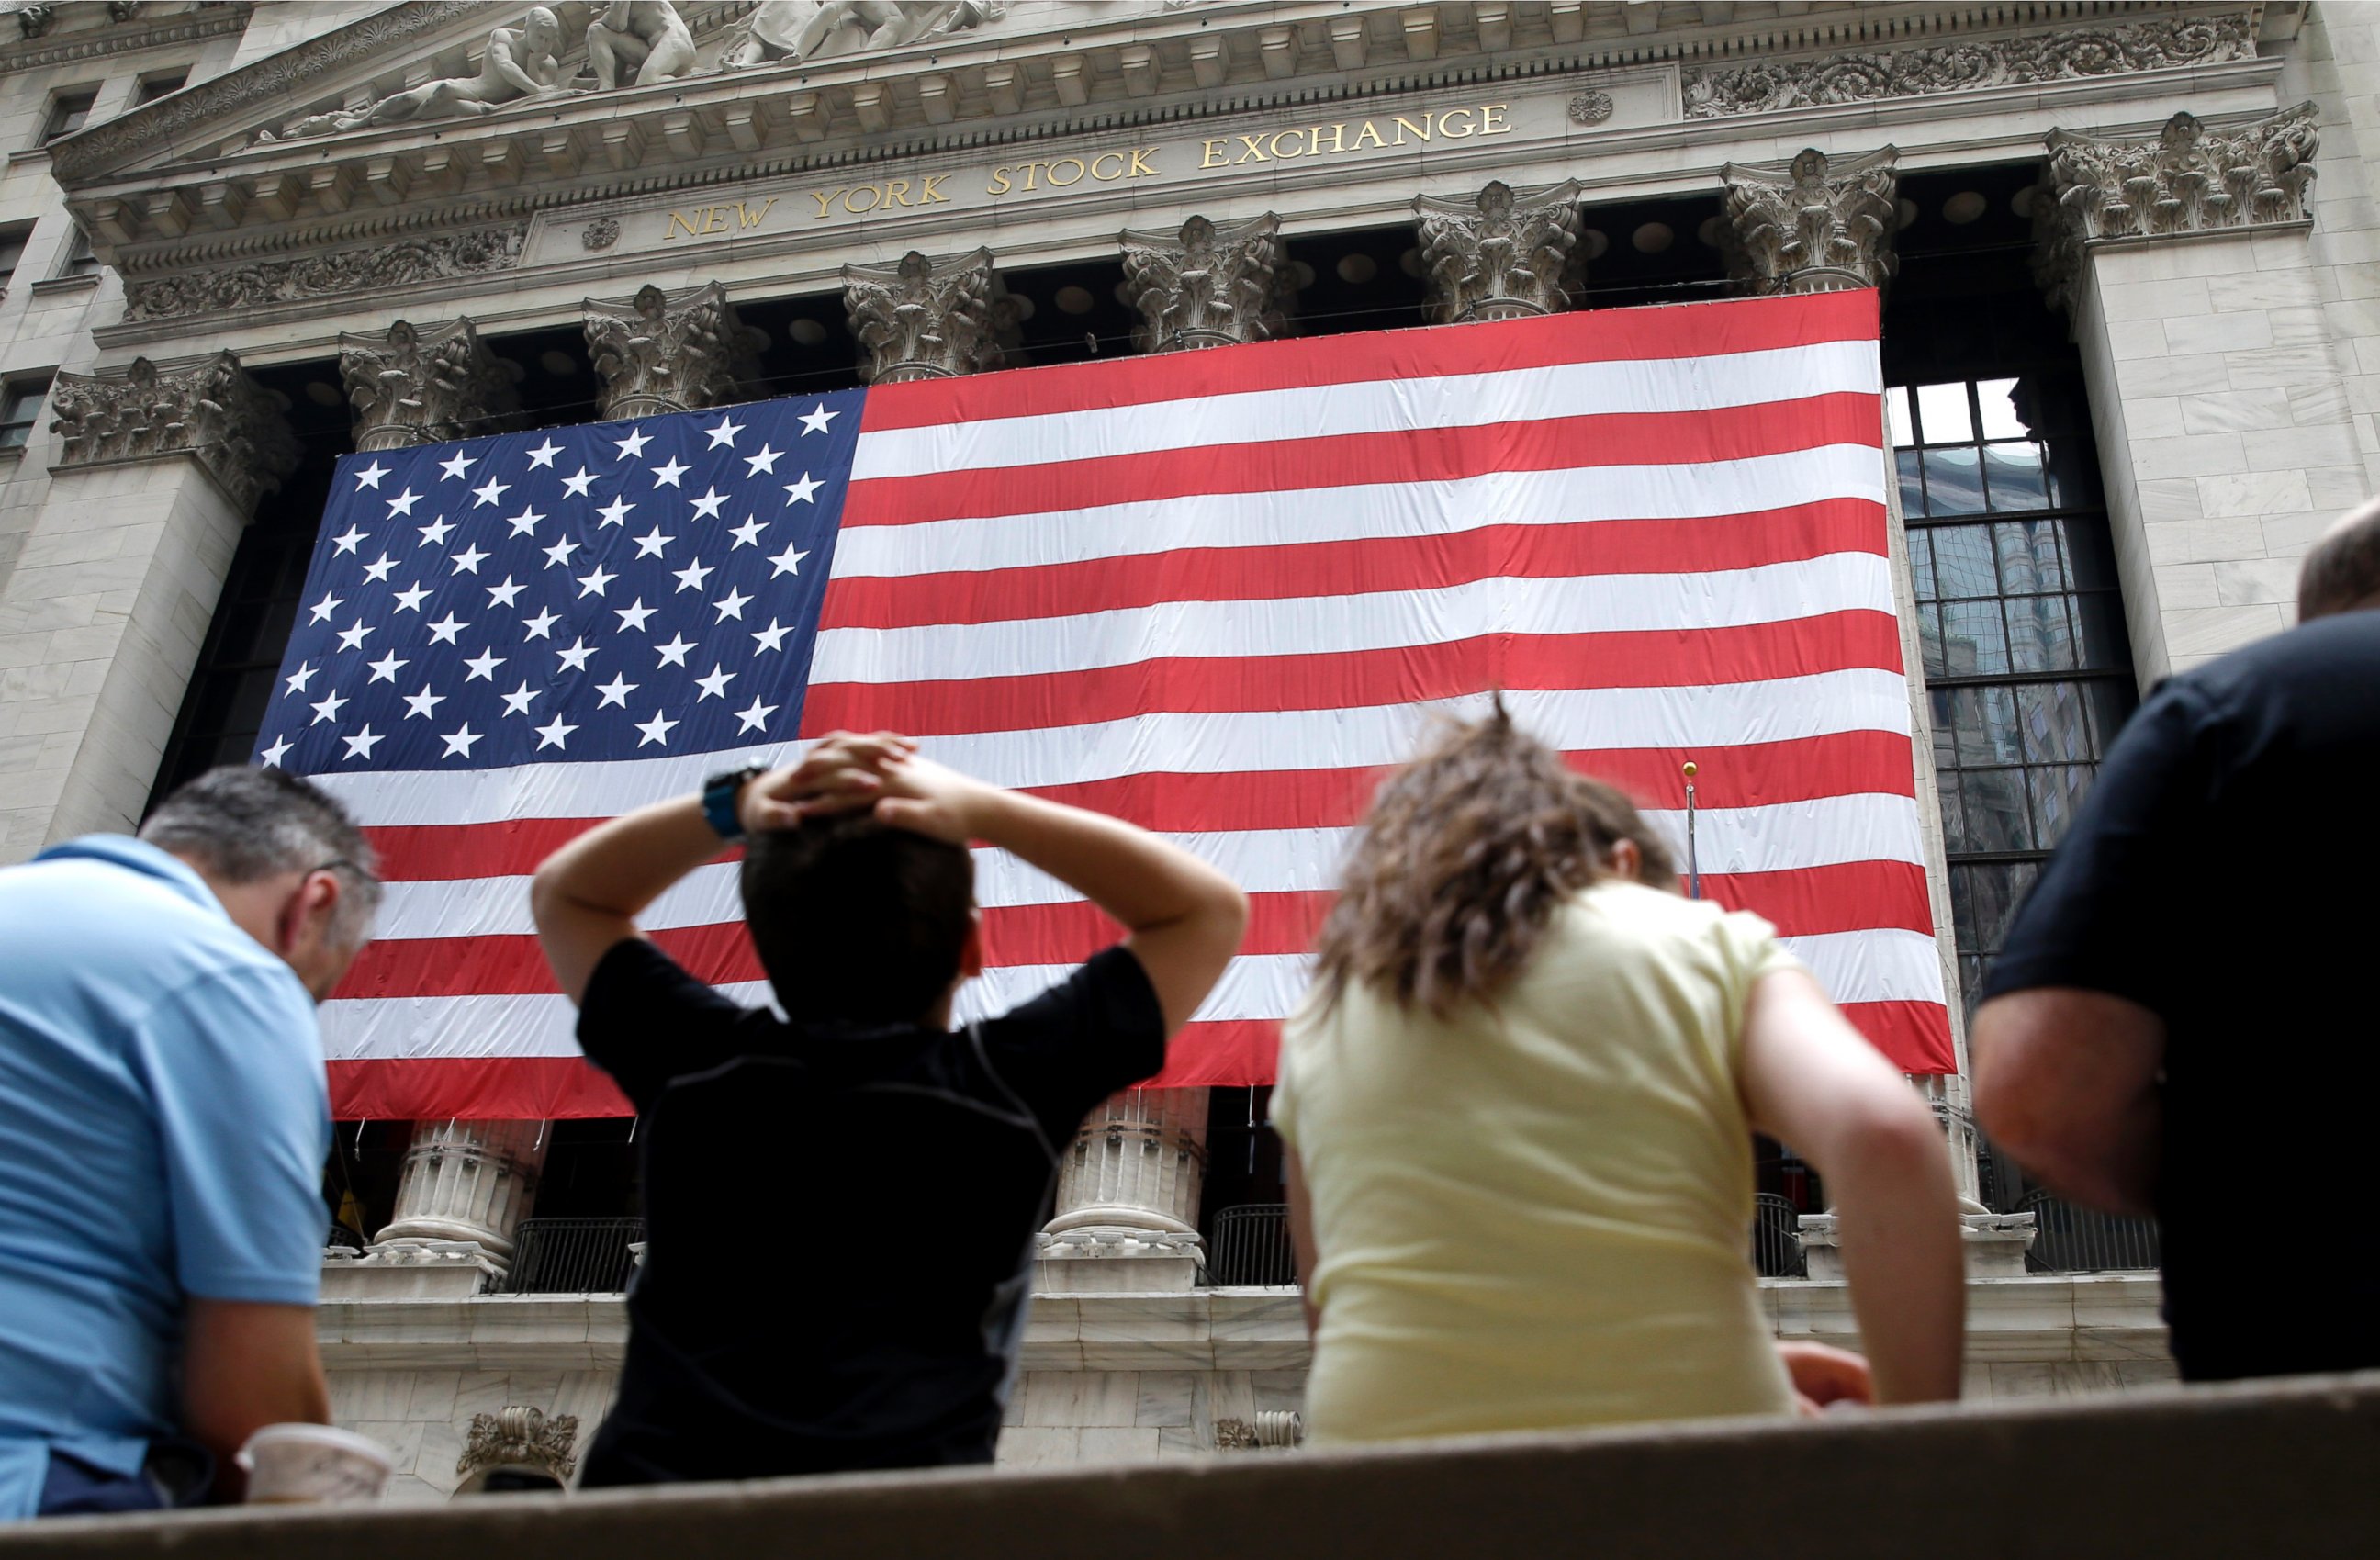 PHOTO: People sit on a bench near the New York Stock Exchange, July 8, 2015.